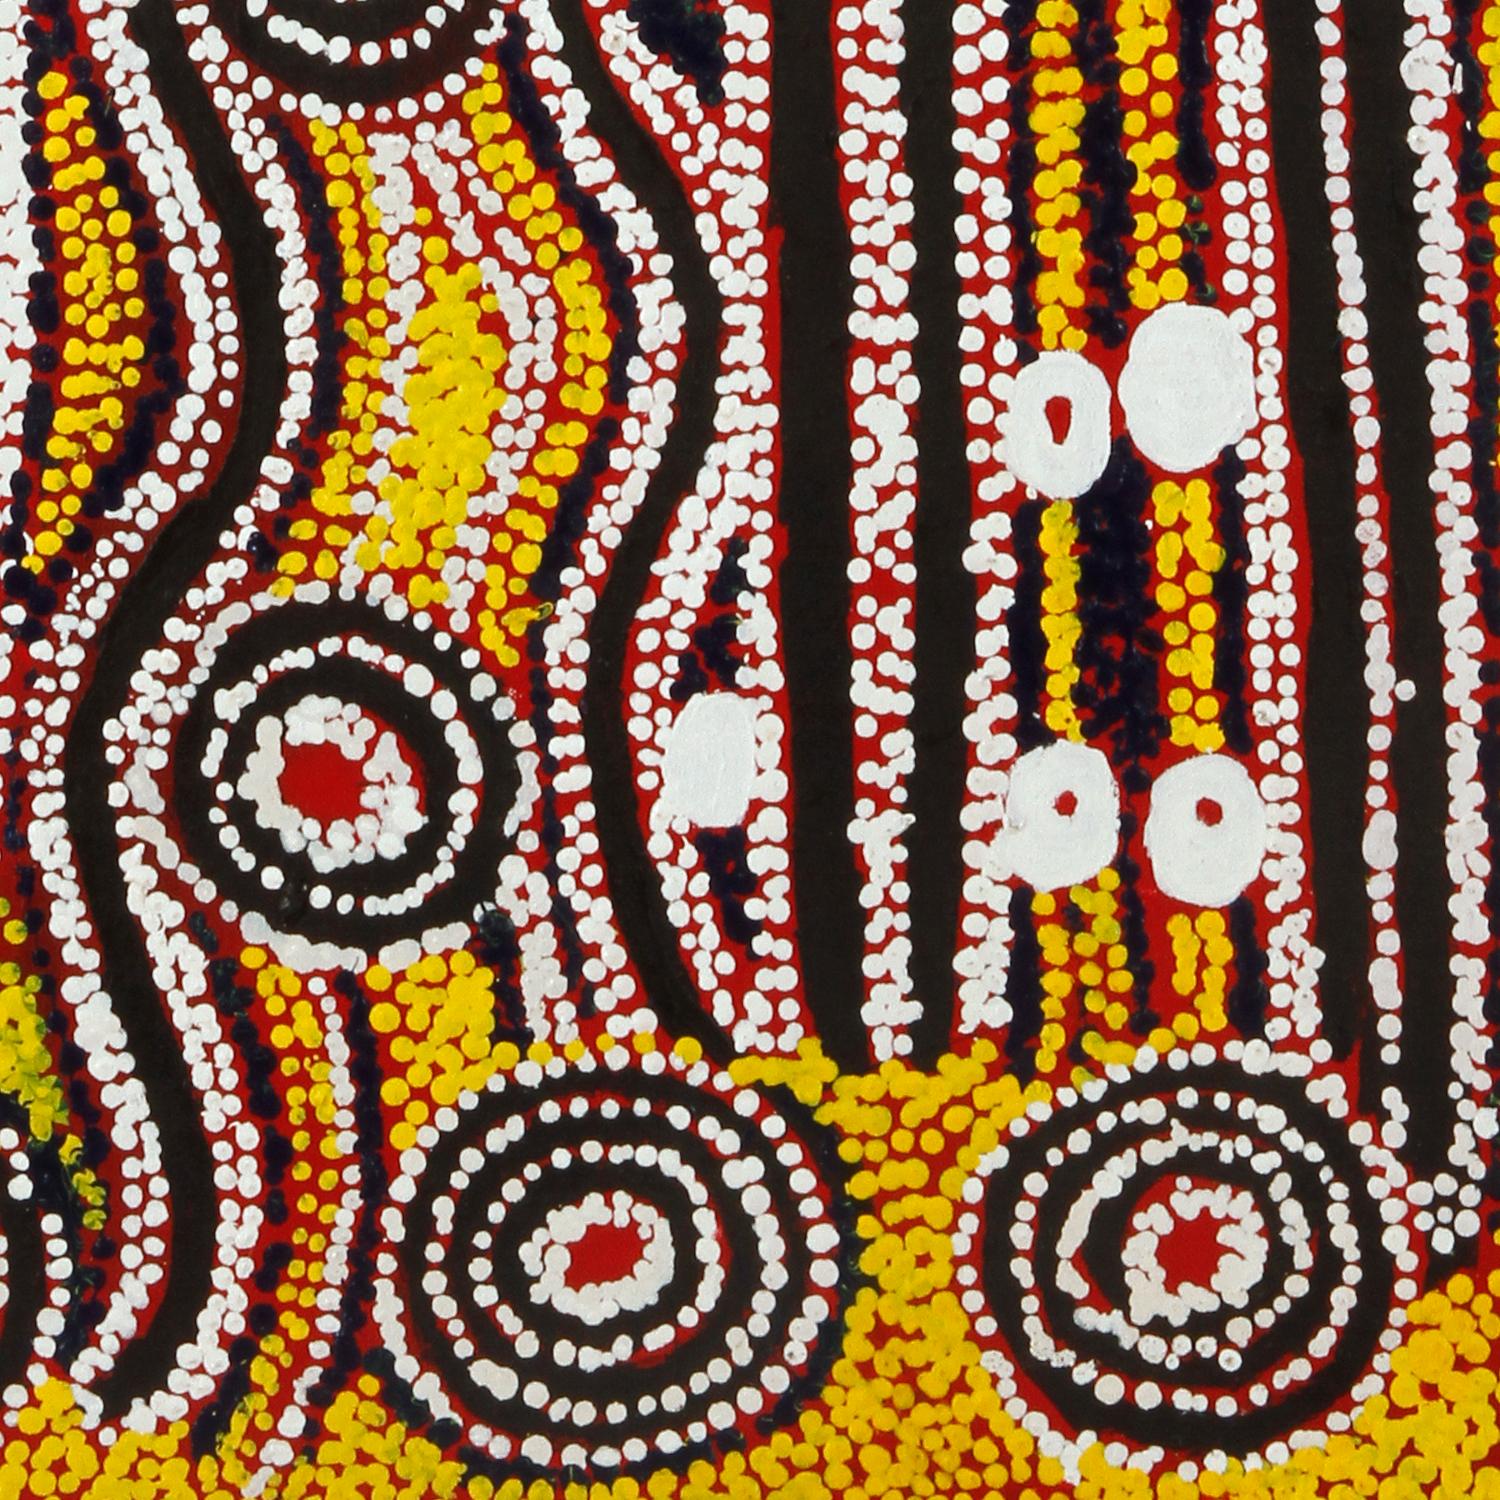 Paddy Japaljarri Sims was born in about 1917 at Kunajarray (Mt Nicker), south-west of Yuendumu at a site where a number of Dreaming tracks interconnect. When he died in 2010 in Yuendumu. He left behind his wife Bessie Nakamarra, his seven children